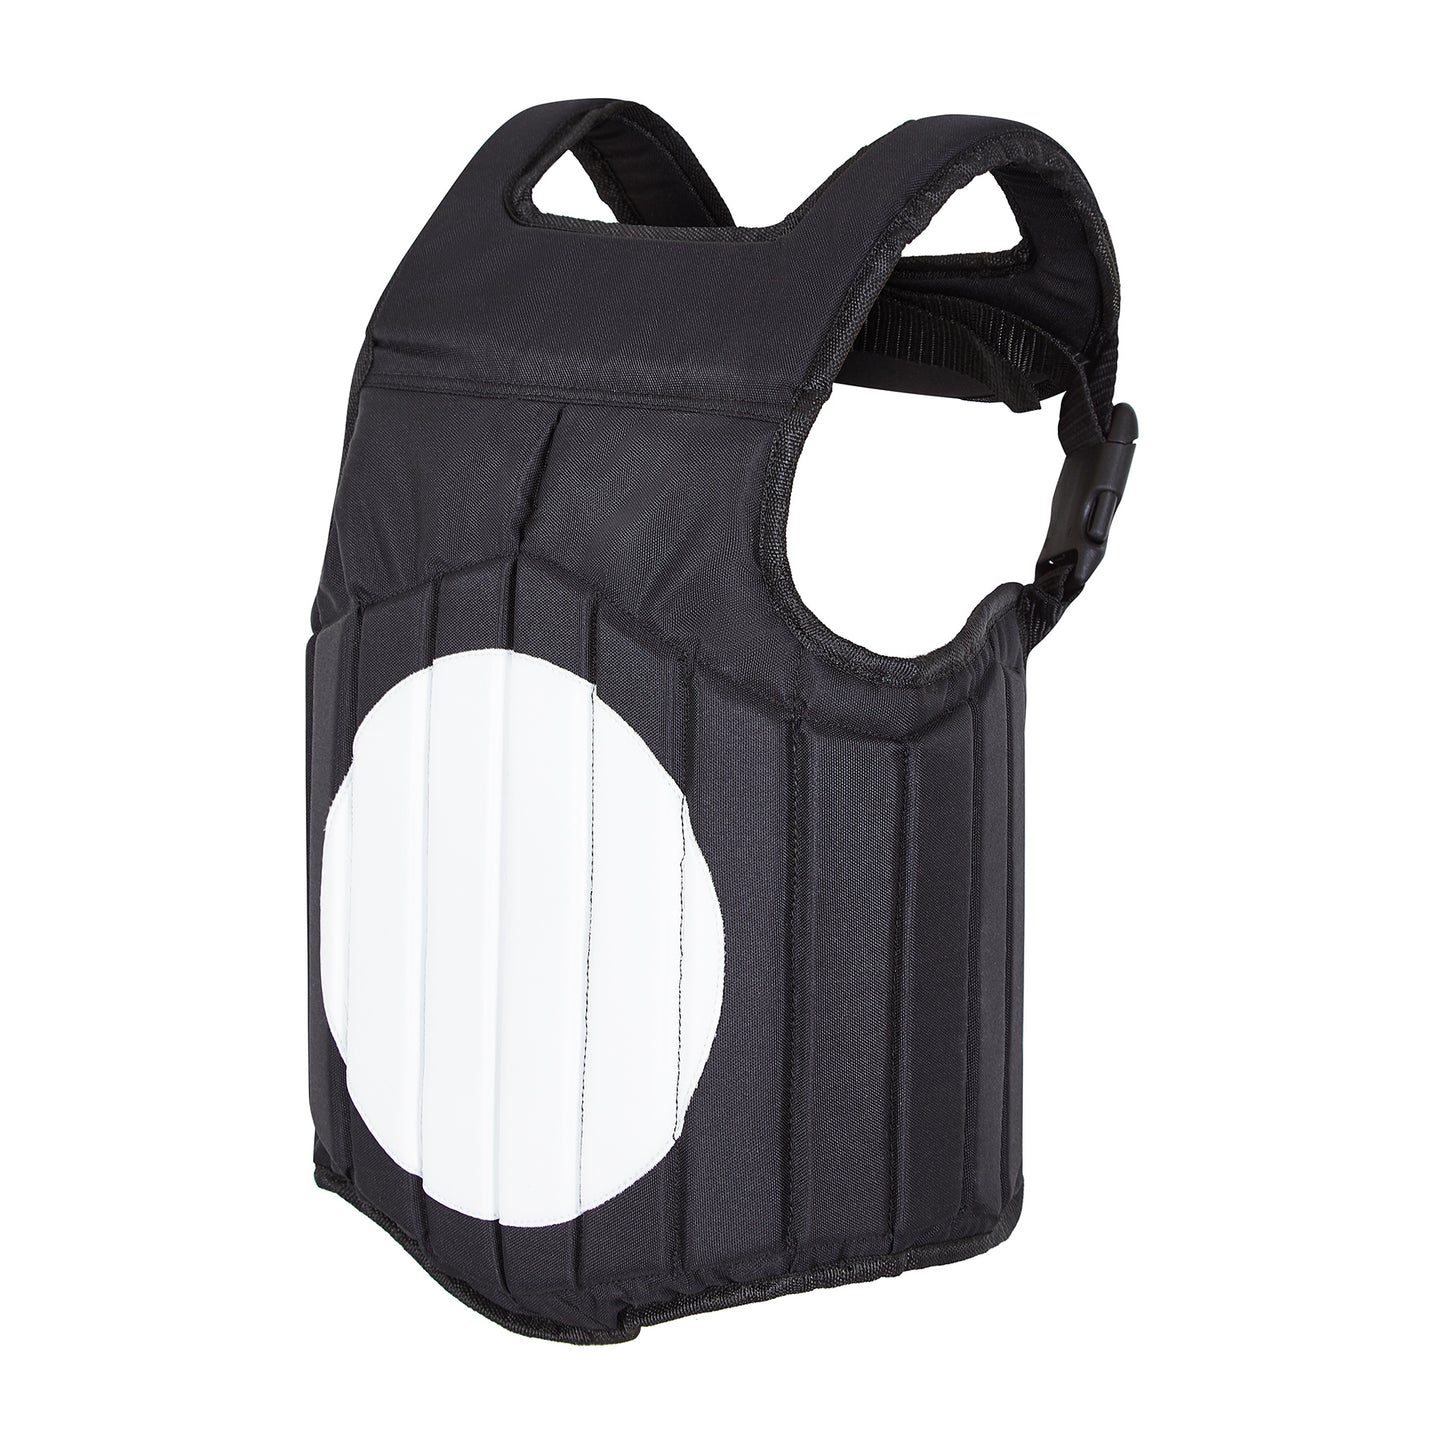 Deluxe Childrens Martial Arts Body Armour